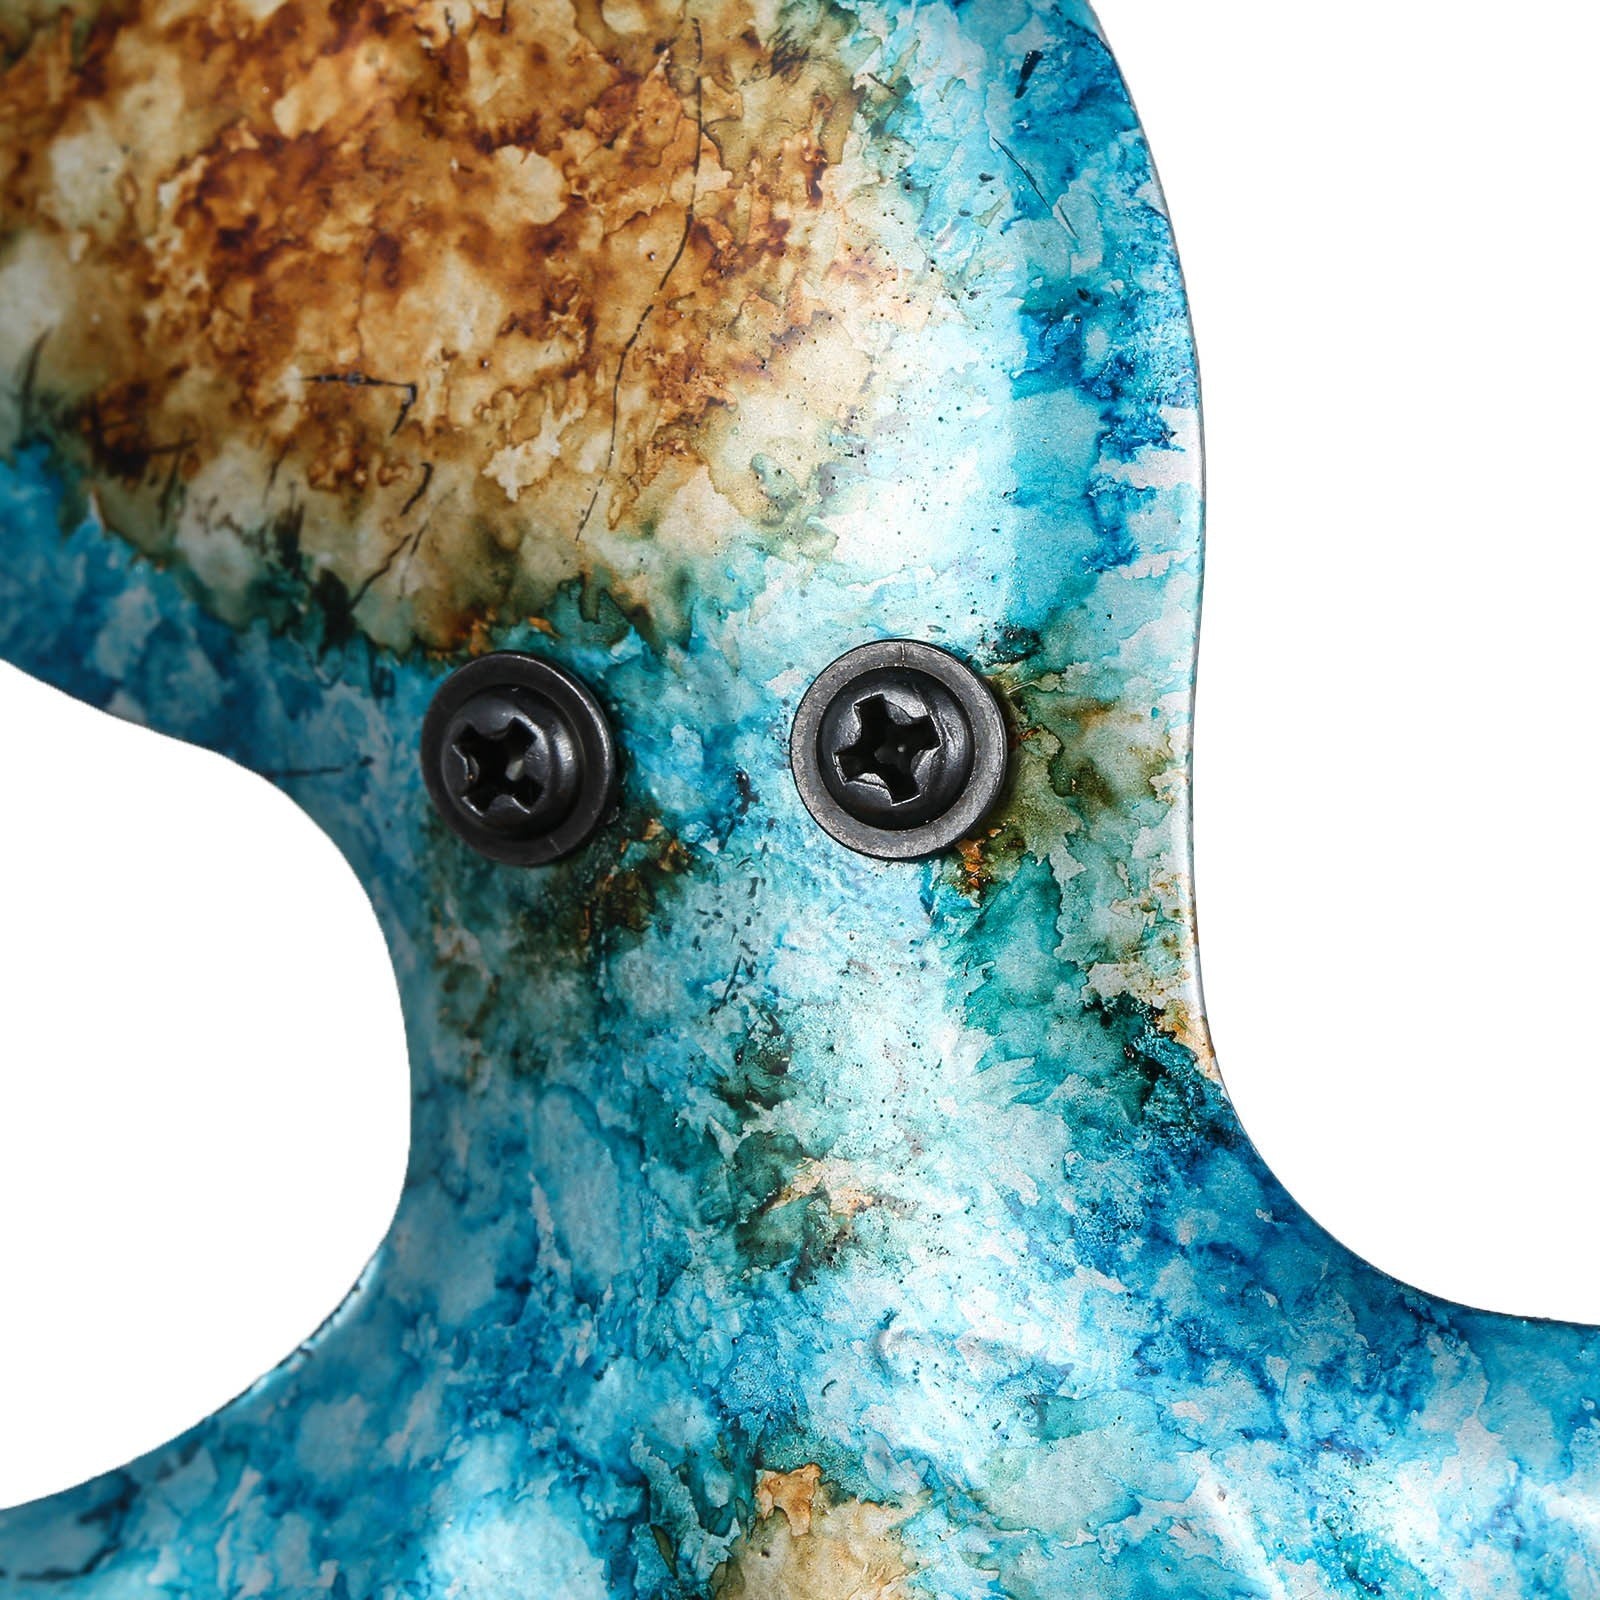 The octopus wall hook is a very special product with a very beautiful shape and color